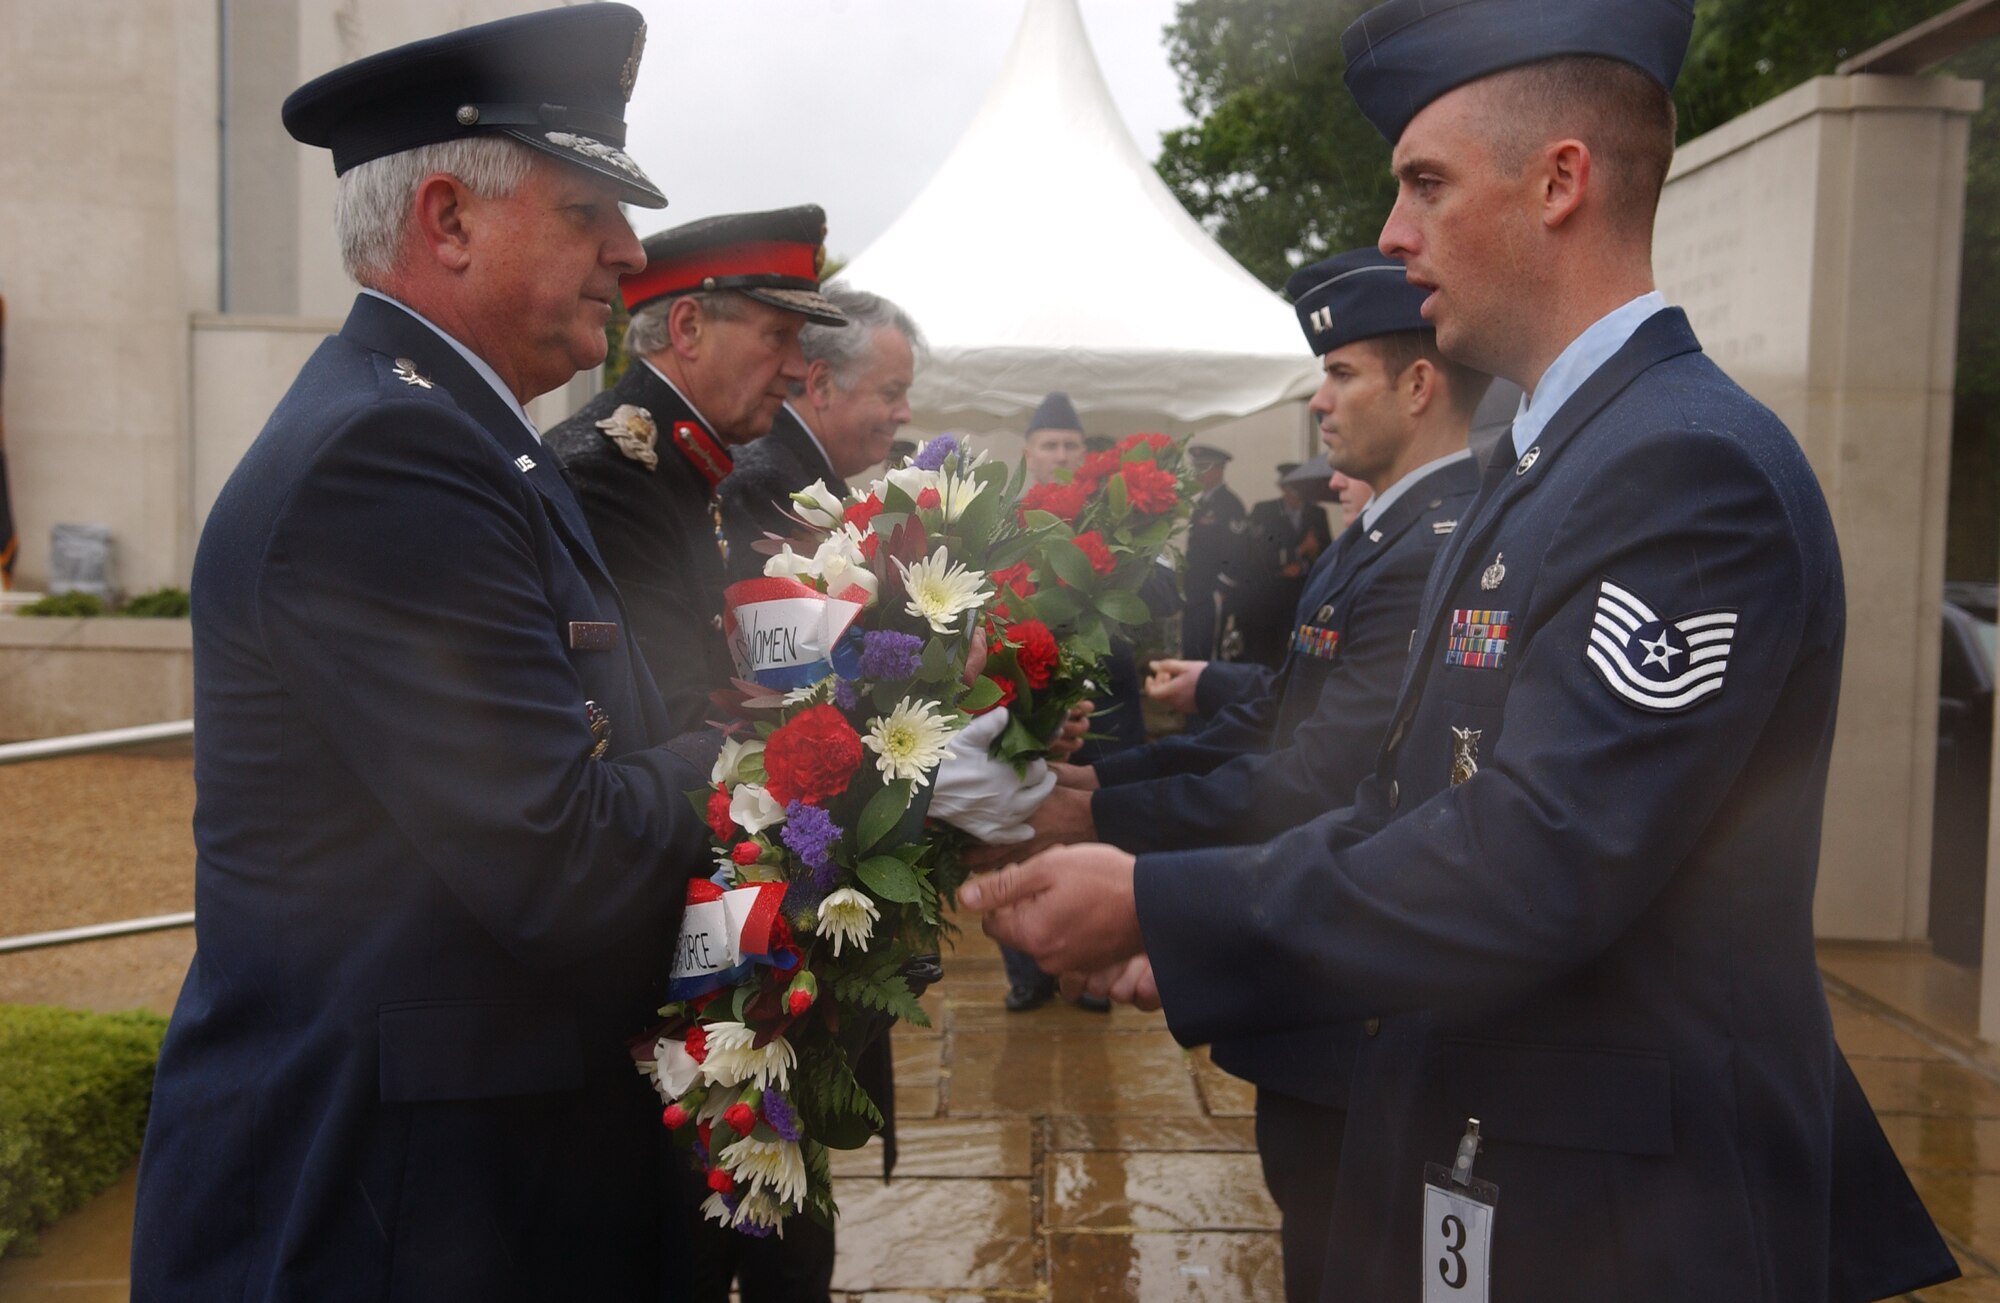 Tech. Sgt. Joshua Trundle, 100th Civil Engineering Squadron, hands Maj. Gen. Paul Fletcher, 3rd Air Force commander, a wreath to honor the 5,126 Americans whose names are listed on a memorial wall at the Madingley World War II American Cemetery, in Cambridge, England, May 28, 2007. (Air Force photo by Tech. Sgt. Tracy L. DeMarco)